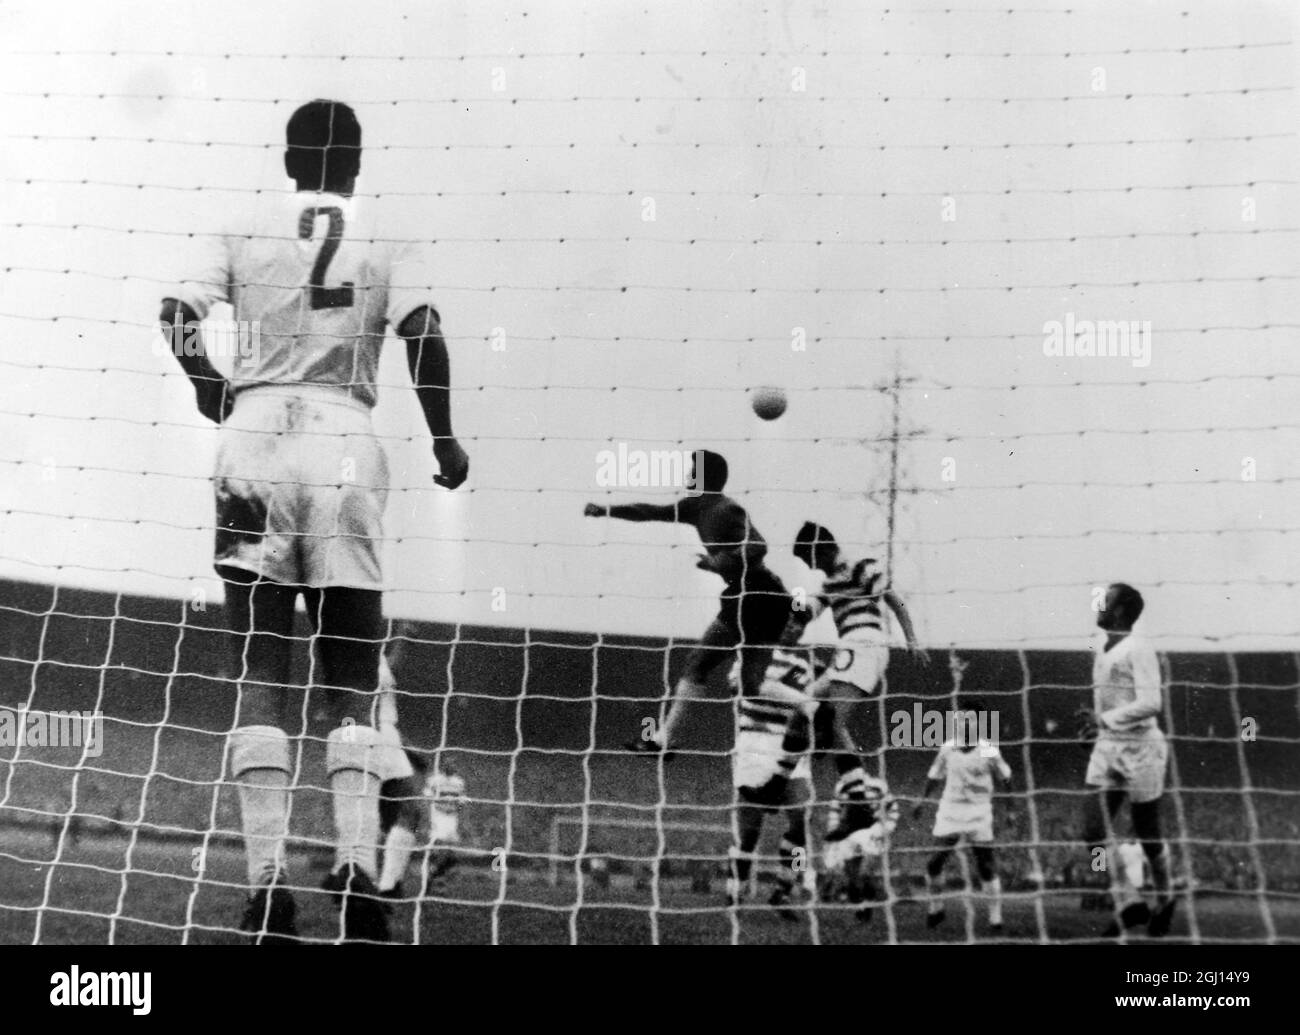 FOOTBALL CHARITY MATCH REAL MADRID V CELTIC GLASGOW ARIQUISTAIN CLEARS ; 11. SEPTEMBER 1962 Stockfoto